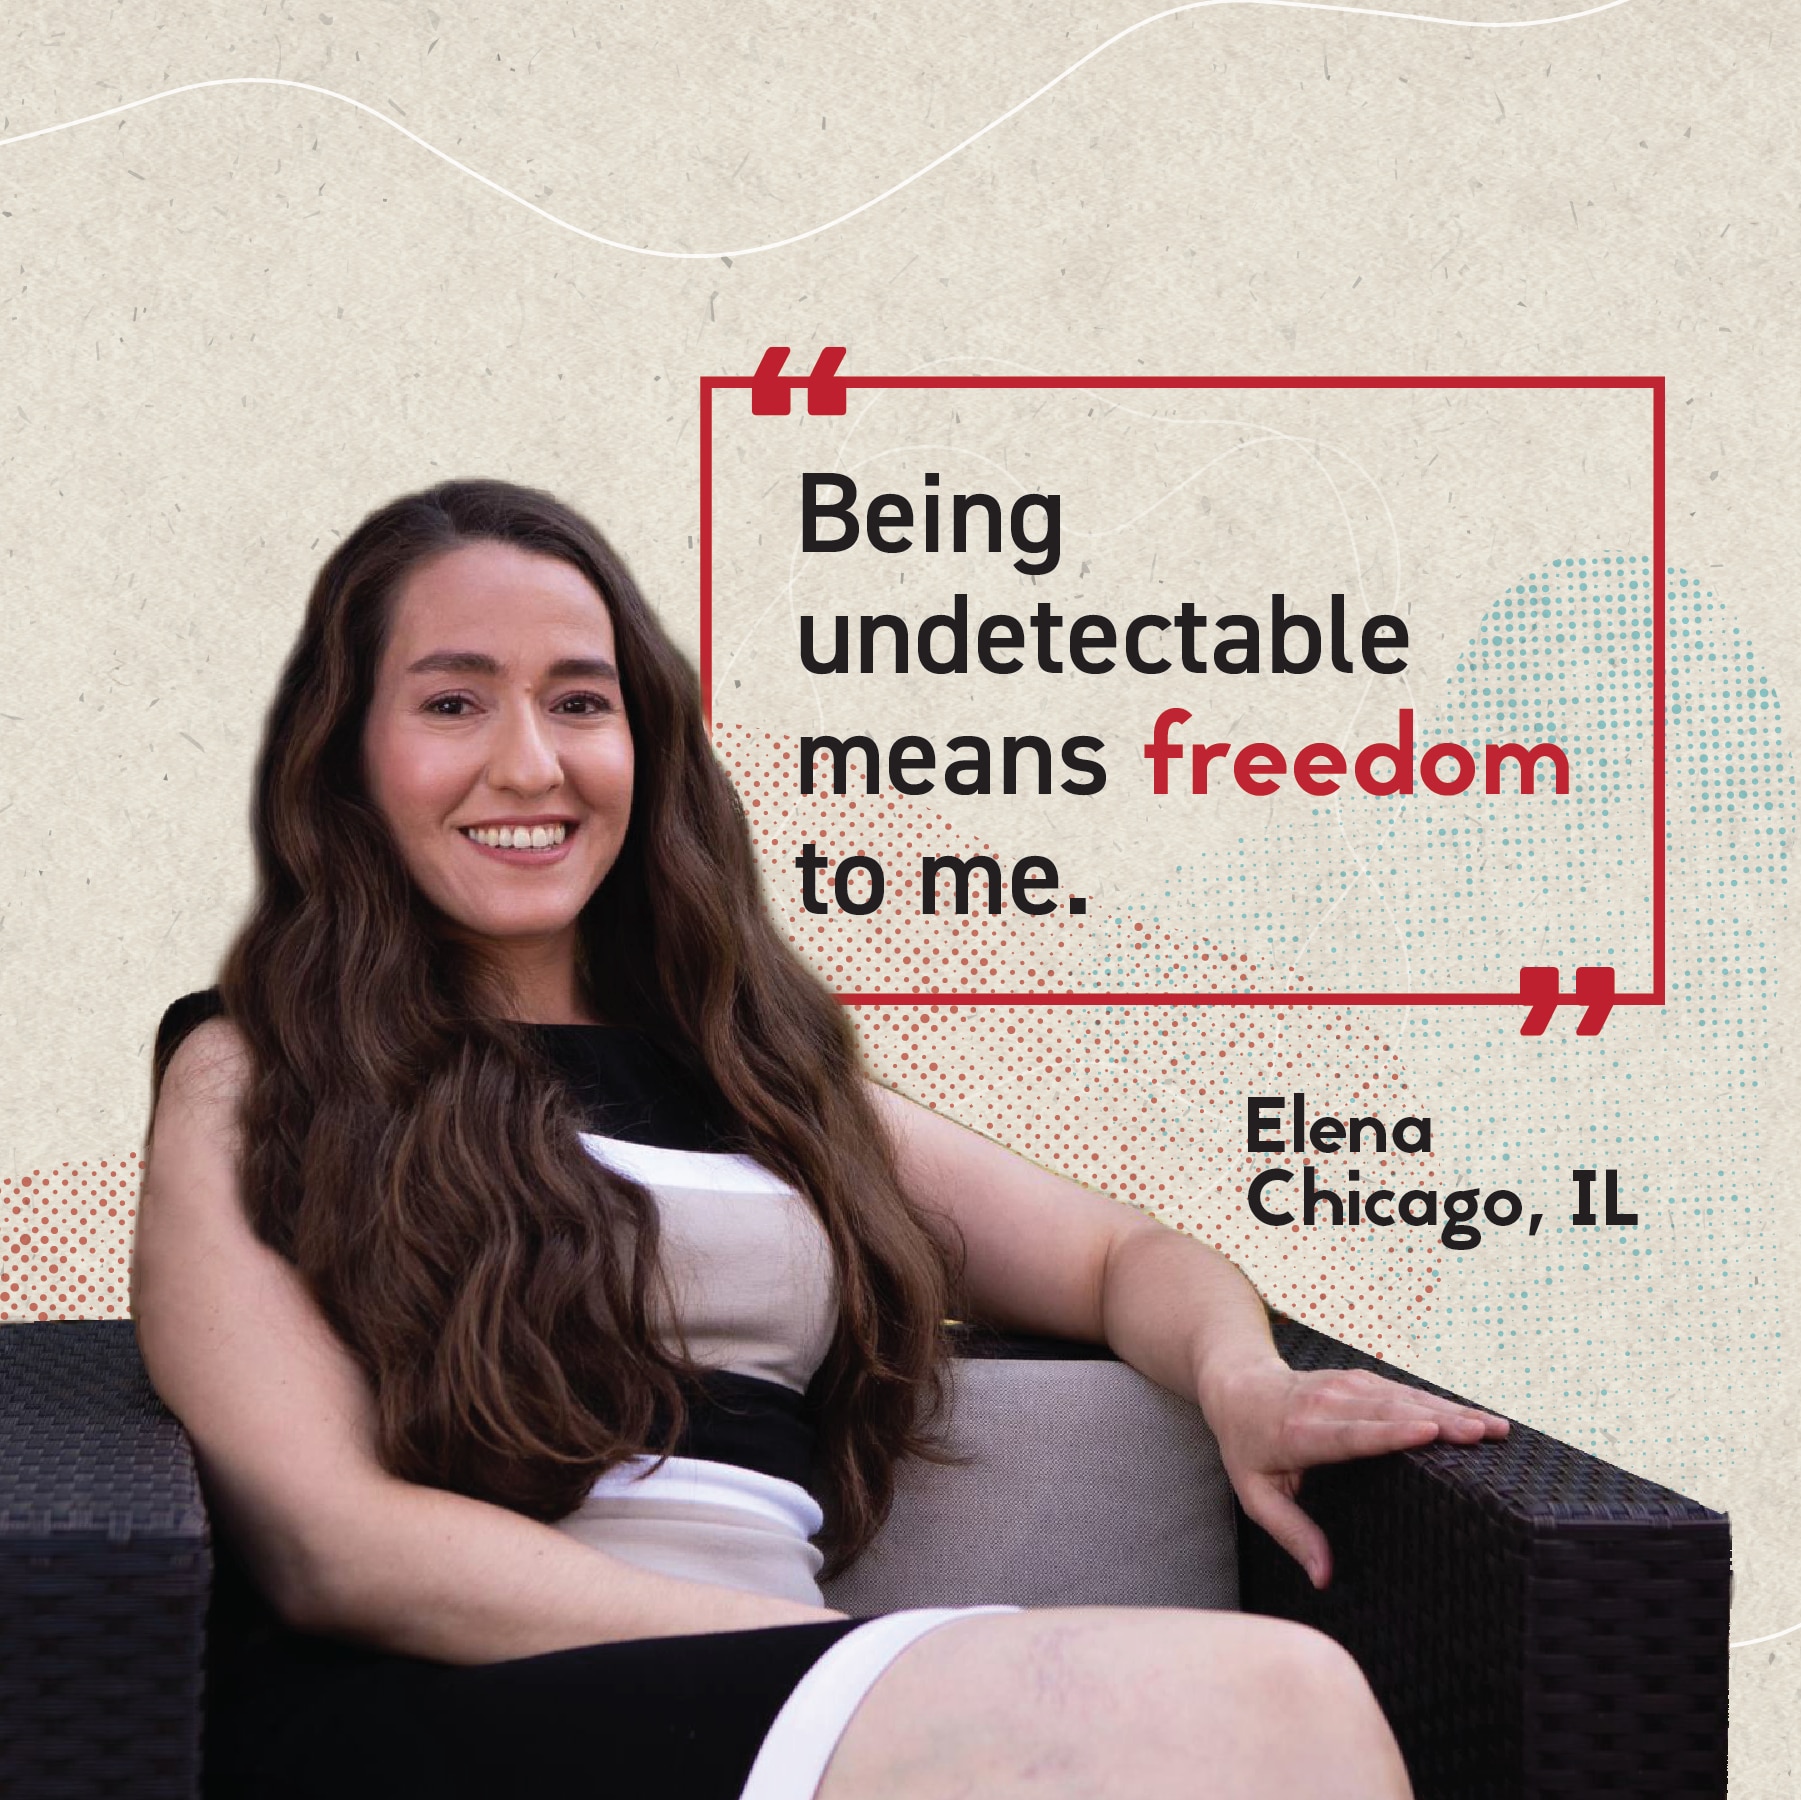 Being undetectable means freedom to me.